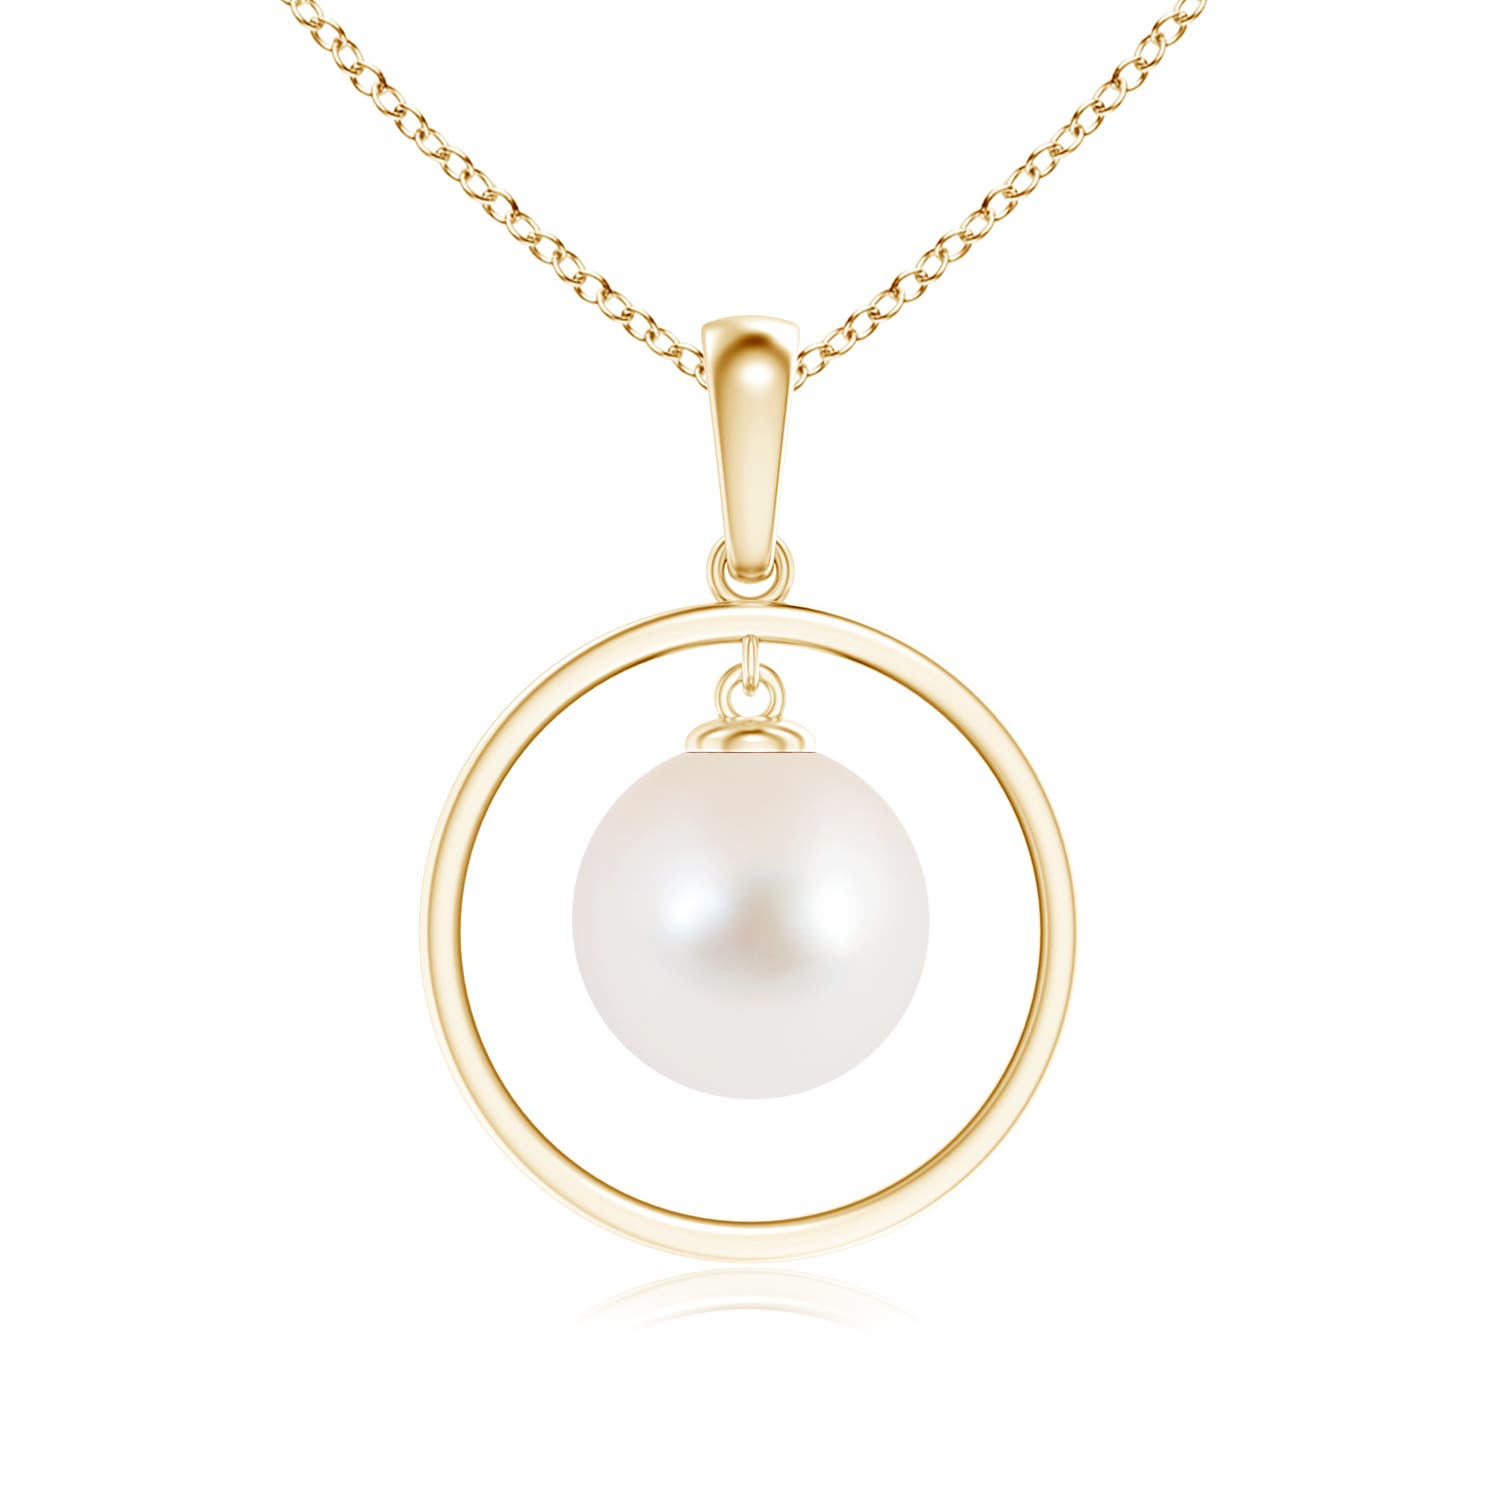 AAA - Freshwater Cultured Pearl / 5.25 CT / 14 KT Yellow Gold